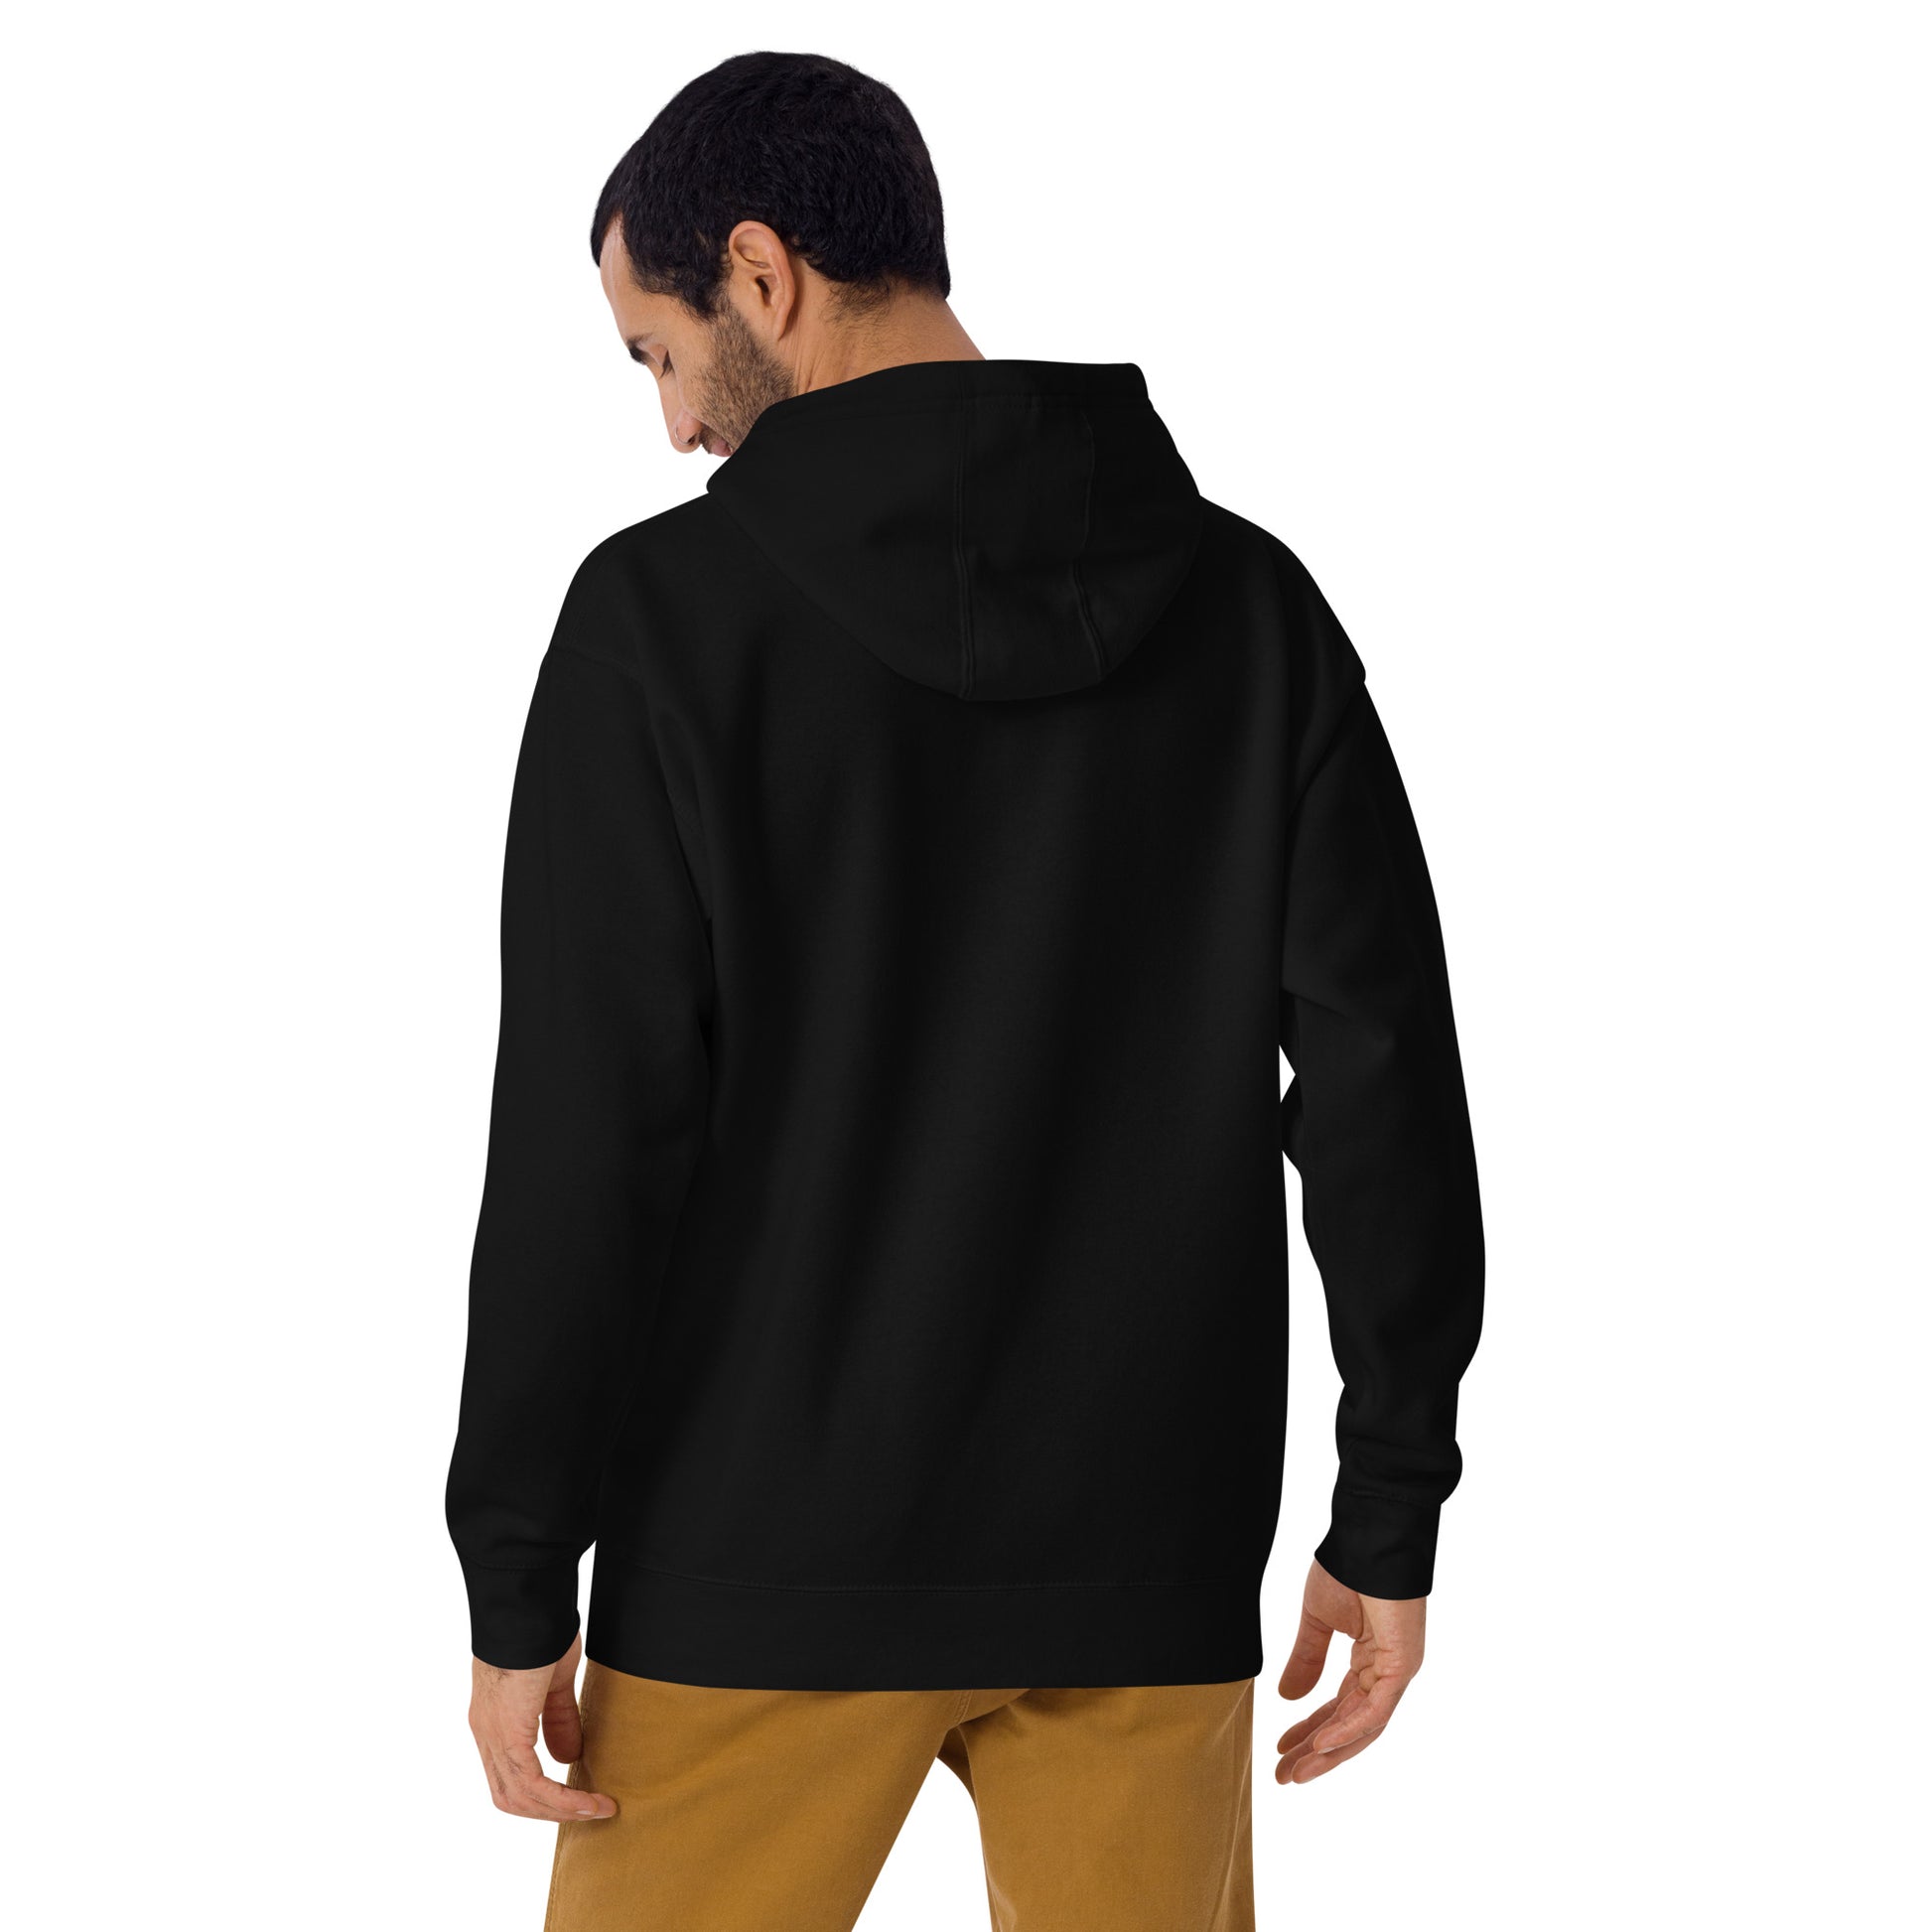 back view of a white man wearing a unisex premium black hoodie